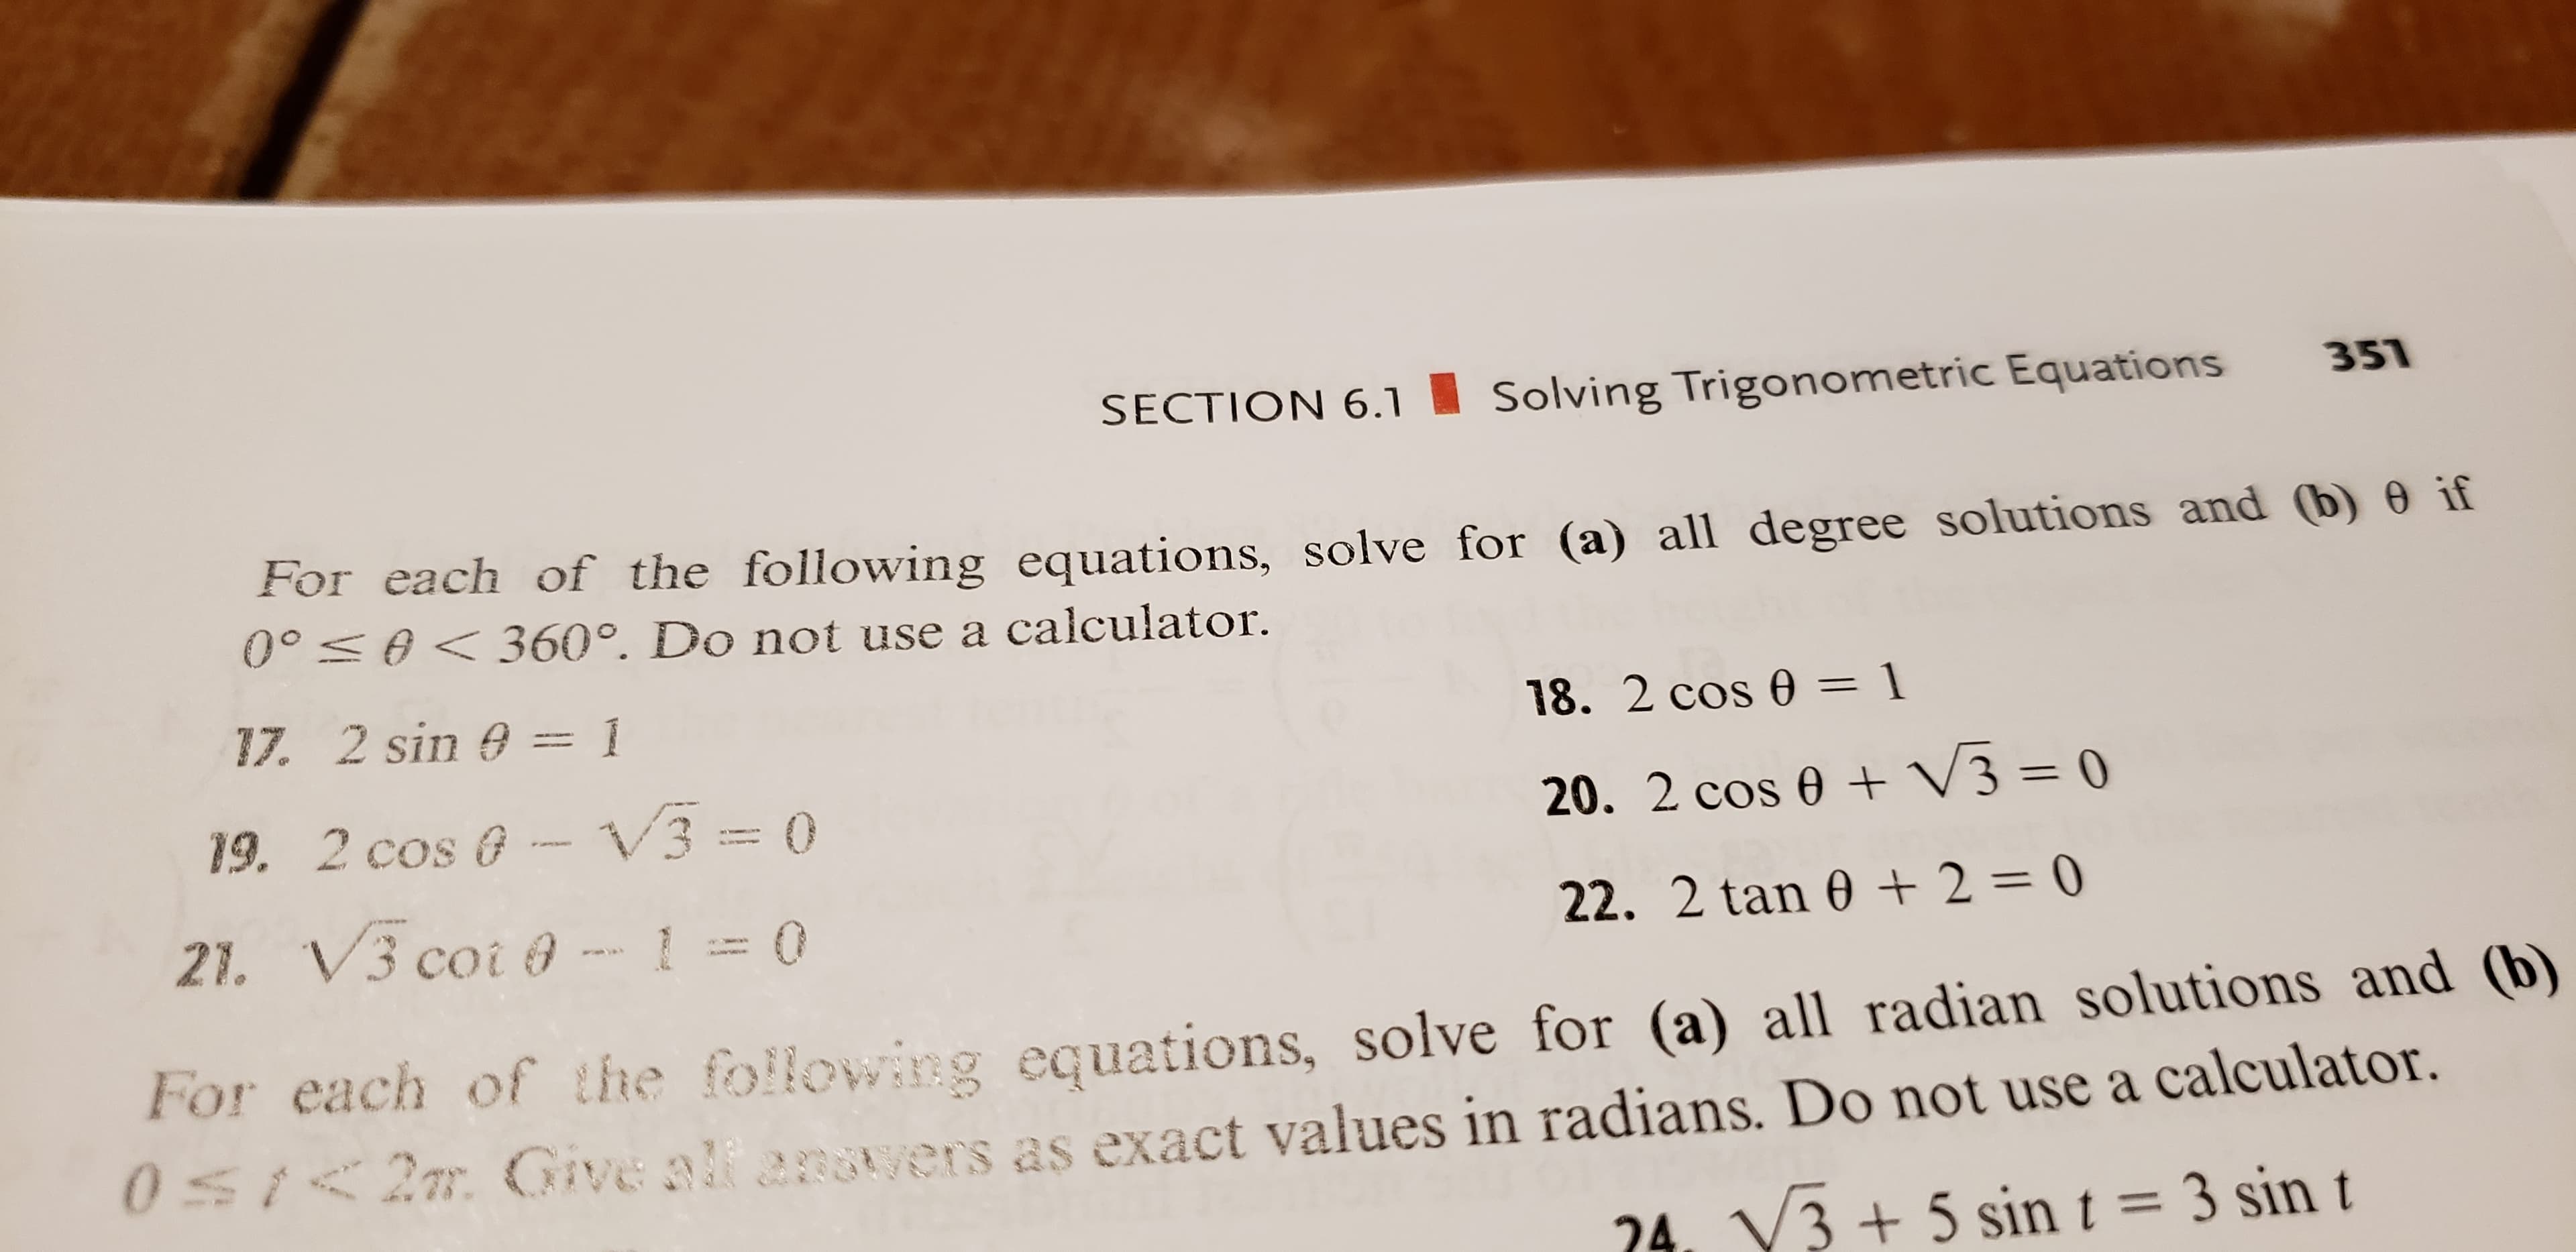 SECTION 6.1
351
Solving Trigonometric Equations
For each of the following equations, solve for (a) all degree solutions and (b) 0 if
00 0360°. Do not use a calculator.
17. 2 sin 0
1
18. 2 cos 0 = 1
V3 = 0
3
19. 2 cos @
20. 2 cos e
0
21. V3 coi @
22. 2 tan 0 2 = 0
For each of the following equations, solve for (a) all radian solutions and (b)
0St2m Give alf angtyers as exact values in radians. Do not use a calculator.
24. V3+ 5 sin t = 3 sin t
FO
